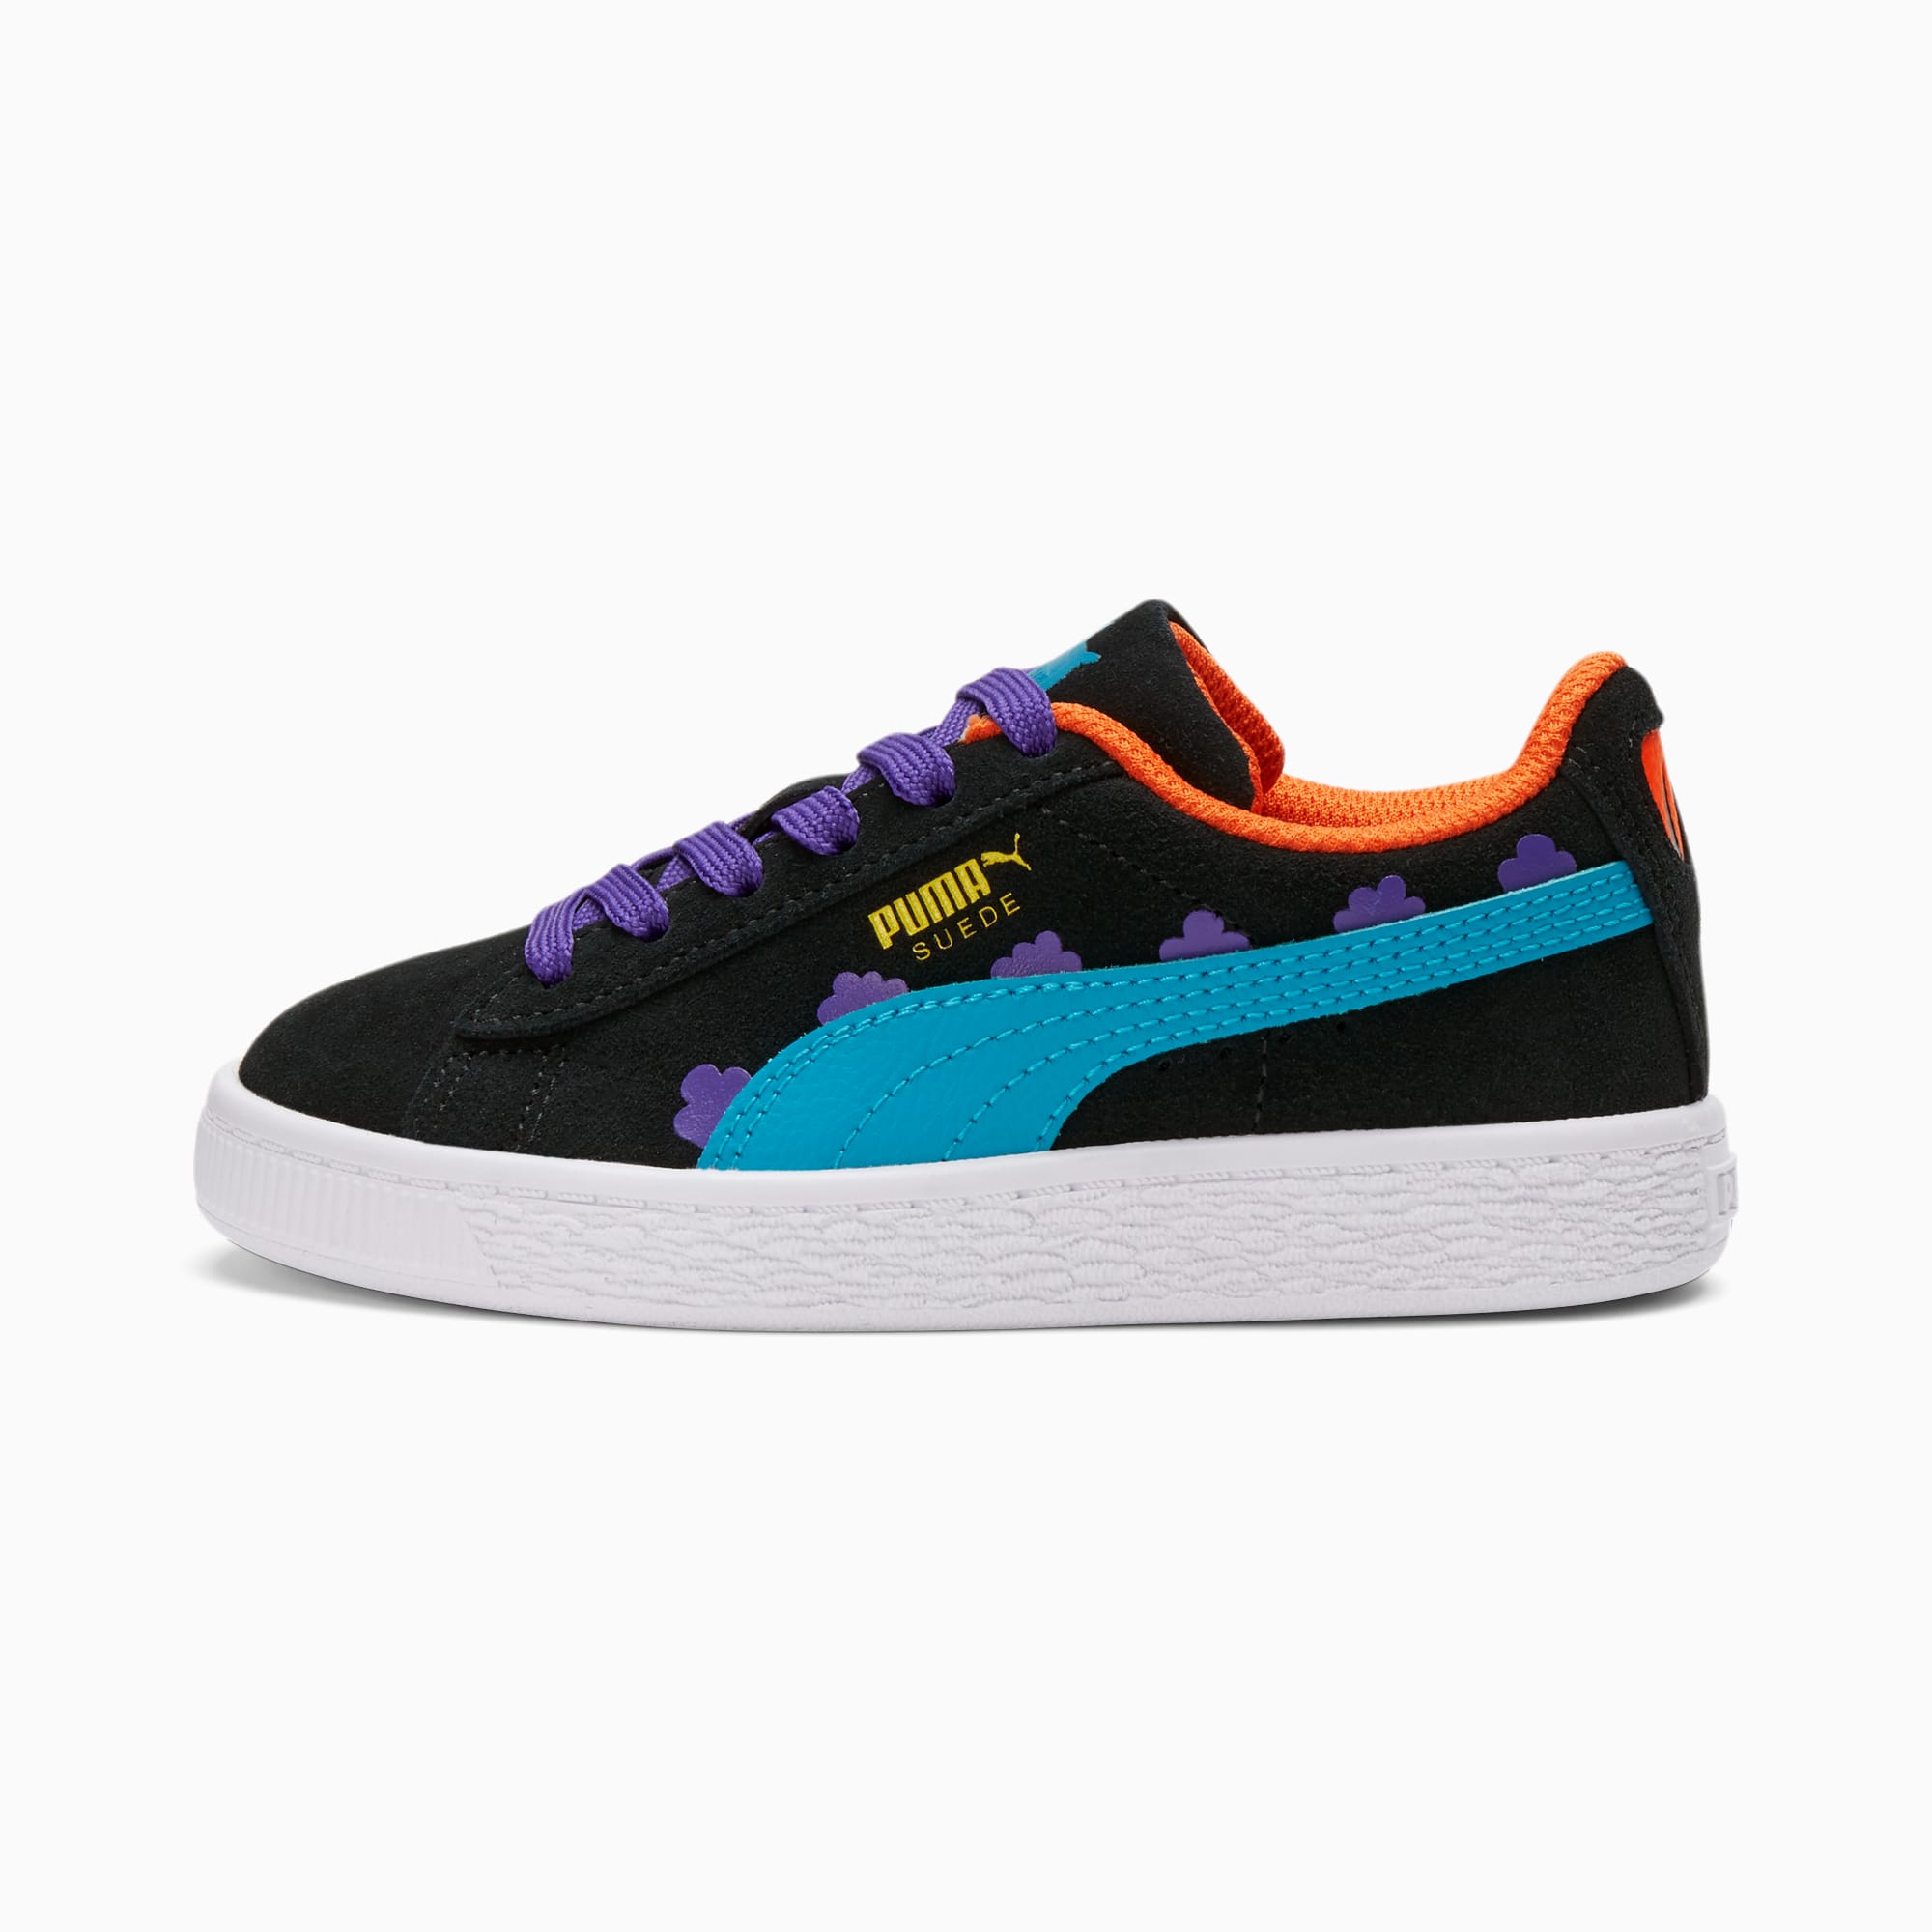 Puma X Rugrats Suede Little Kids, Please Take Your Shoes Off Rugrats Meaning